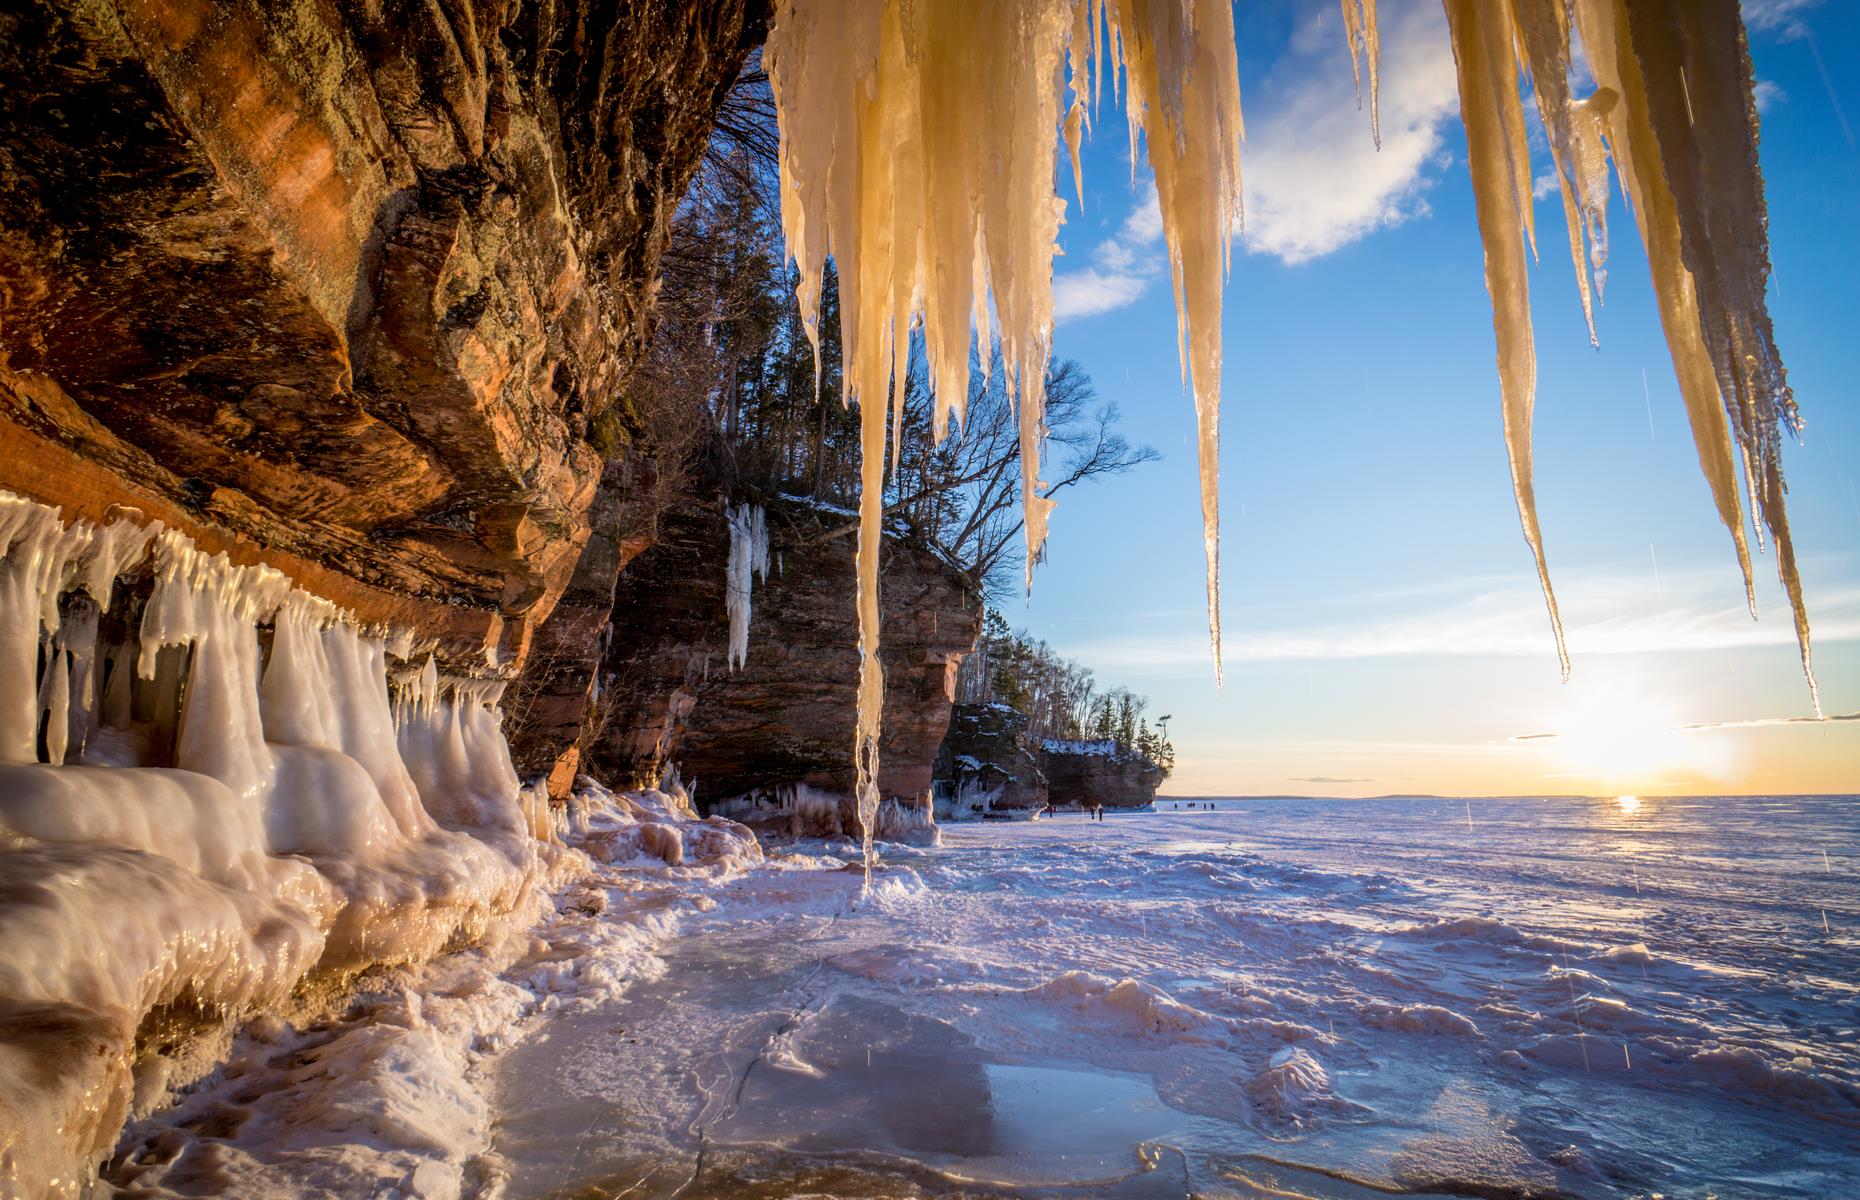 <p>Certain conditions are needed to visit the ice formations at <a href="https://www.nps.gov/apis/index.htm">Apostle Islands National Shoreline</a>. They can only be reached by foot, when the ice on Lake Superior is thick enough to walk on. Some years, it isn’t. But that just makes gazing at this natural spectacle, where caves drip with icicles by the lakeshore, even more spectacular.</p>